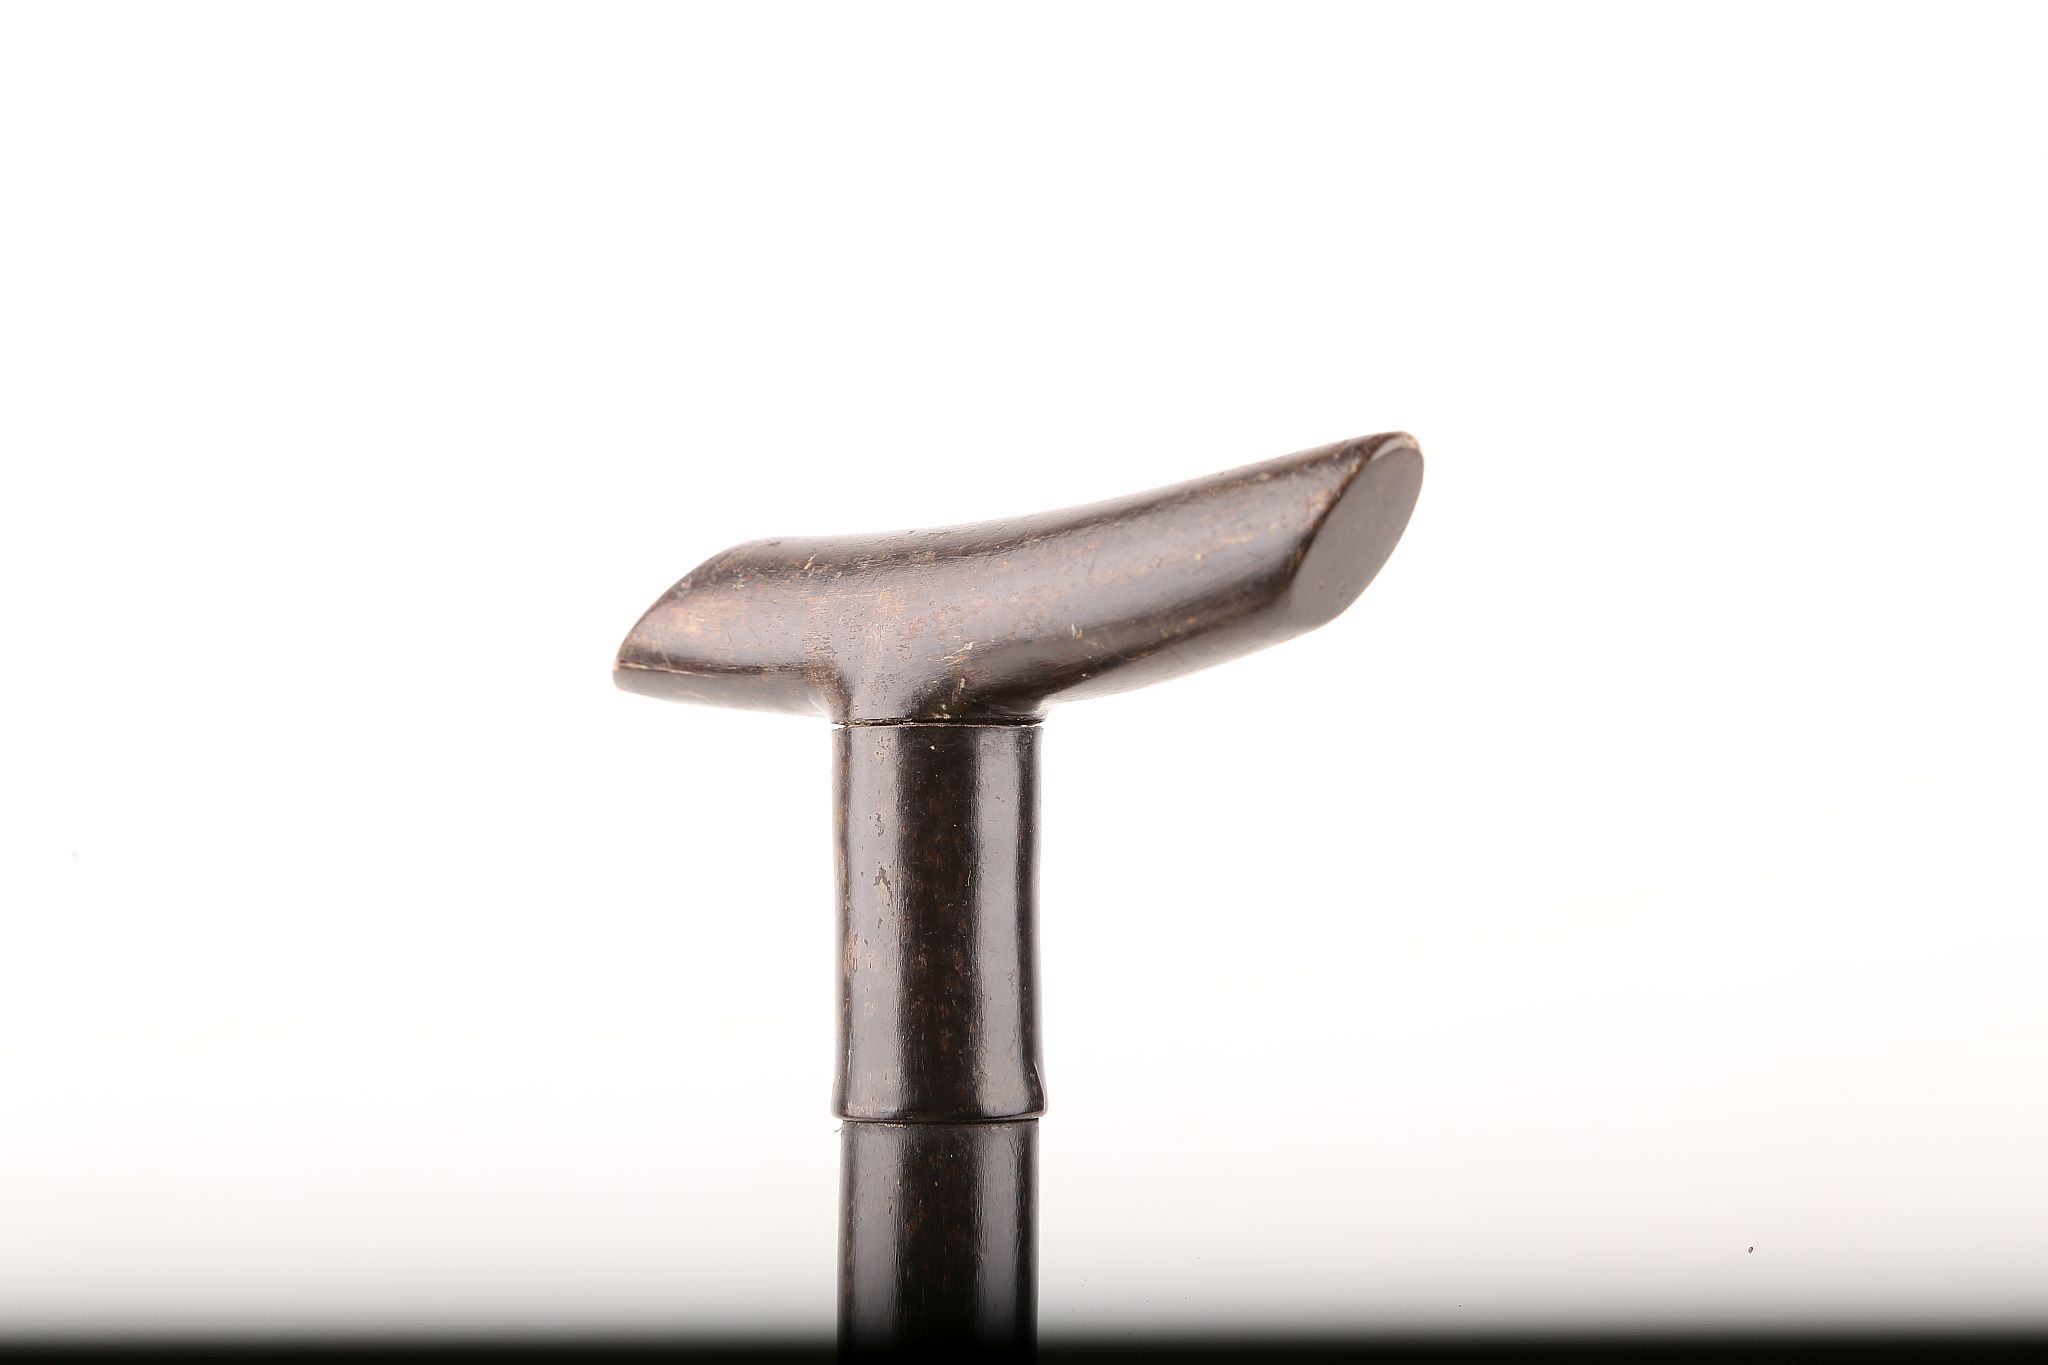 A HORN SECTIONAL TAU SHAPED HANDLED CANE, 85cm. - Image 4 of 6